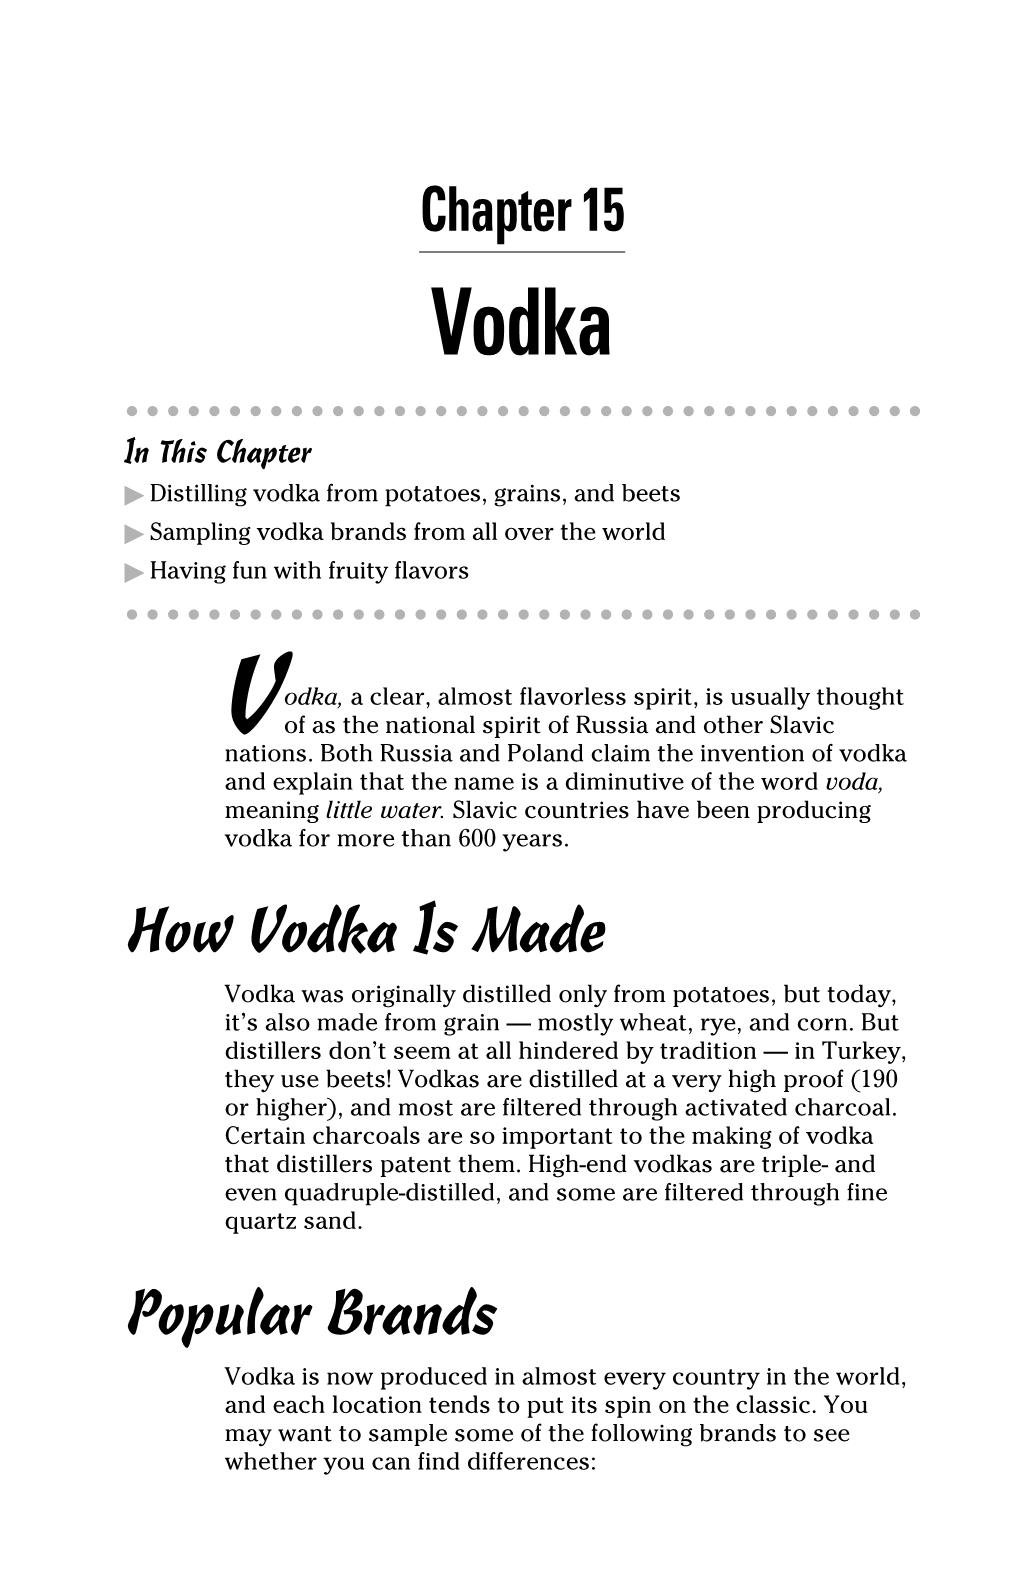 Chapter 15 How Vodka Is Made Popular Brands